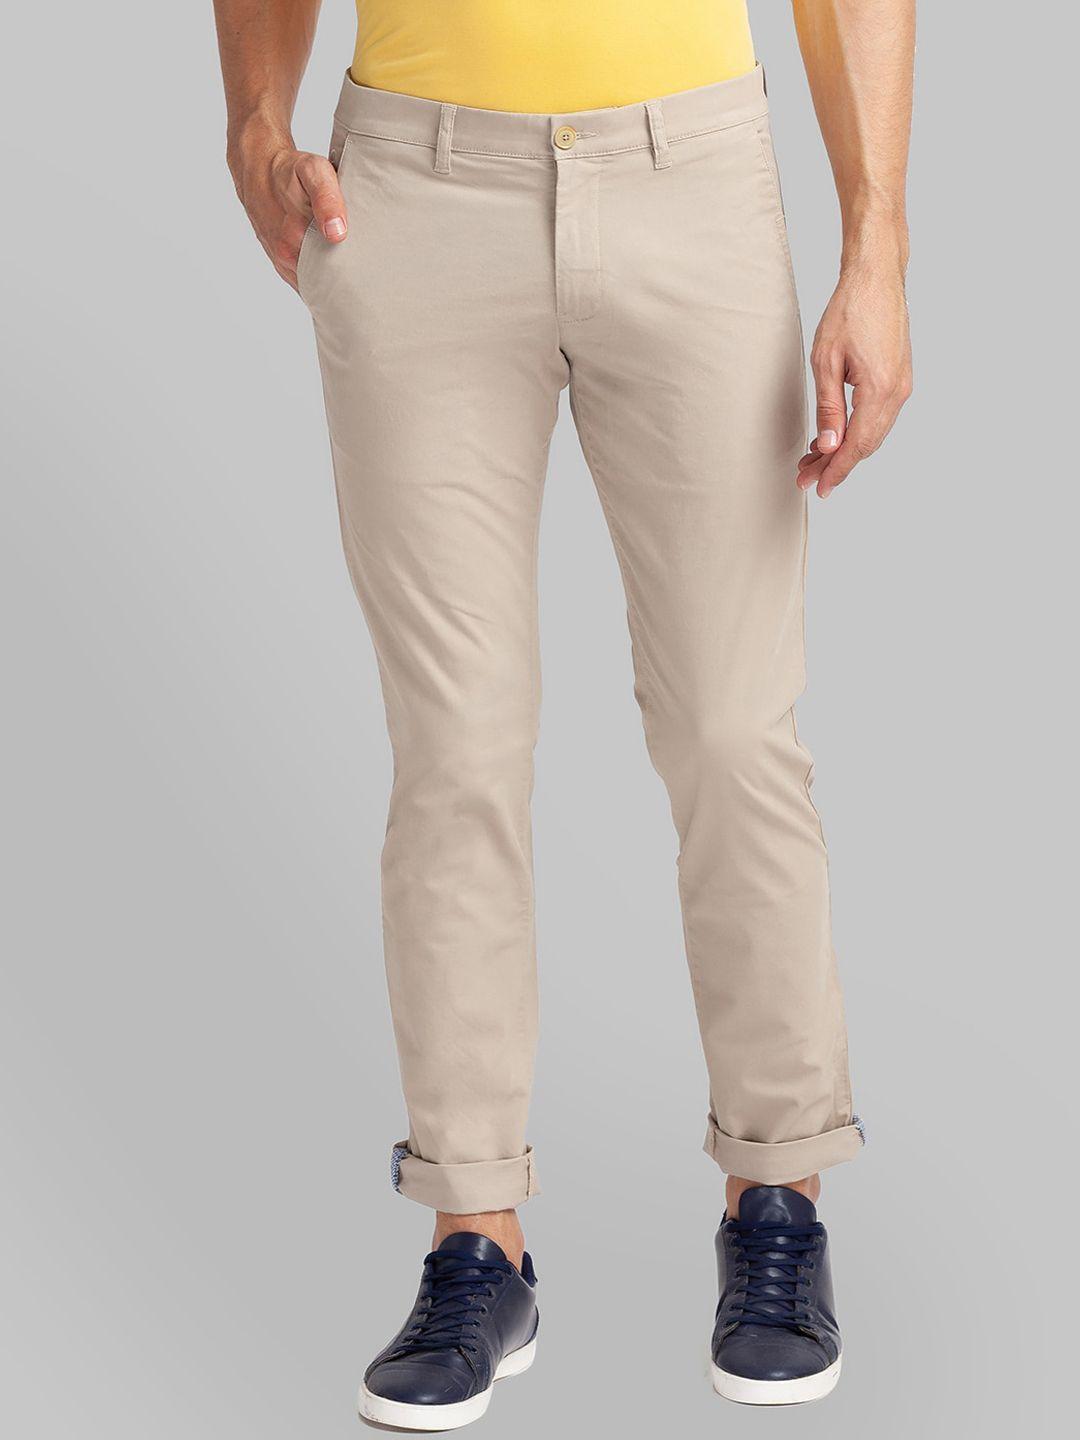 parx men grey tapered fit trousers